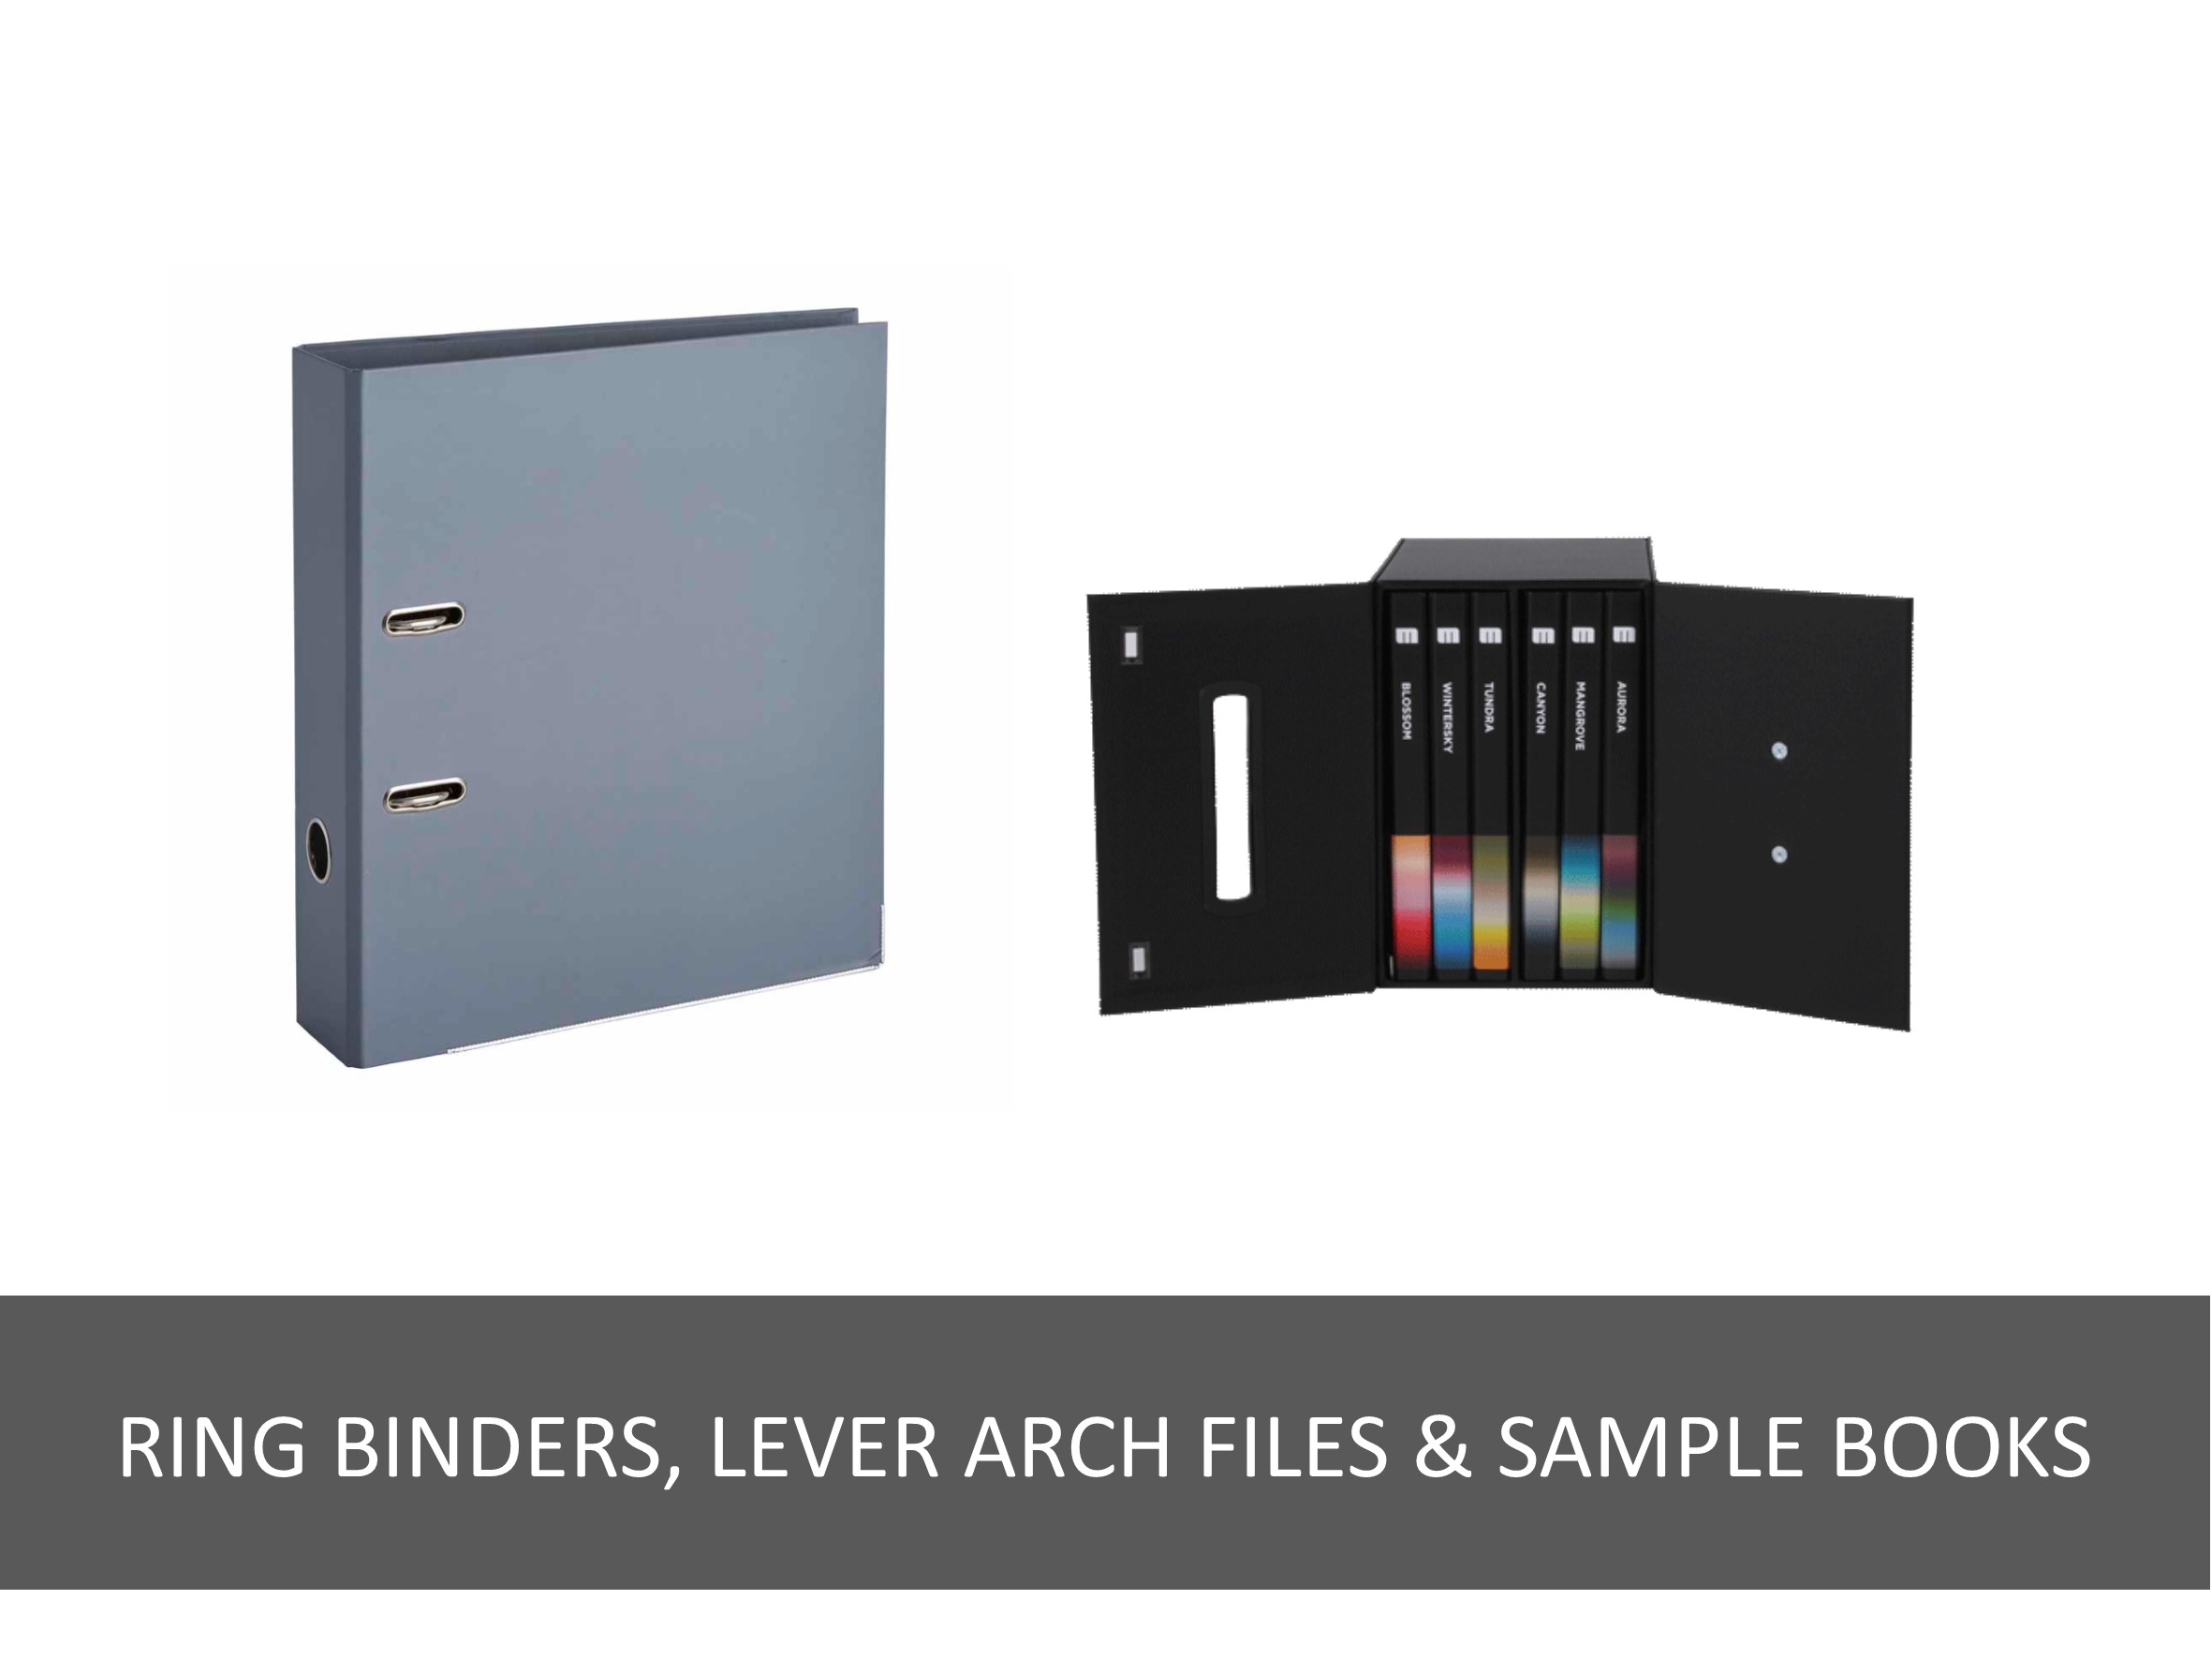 Ring binders, lever arch files & sample books